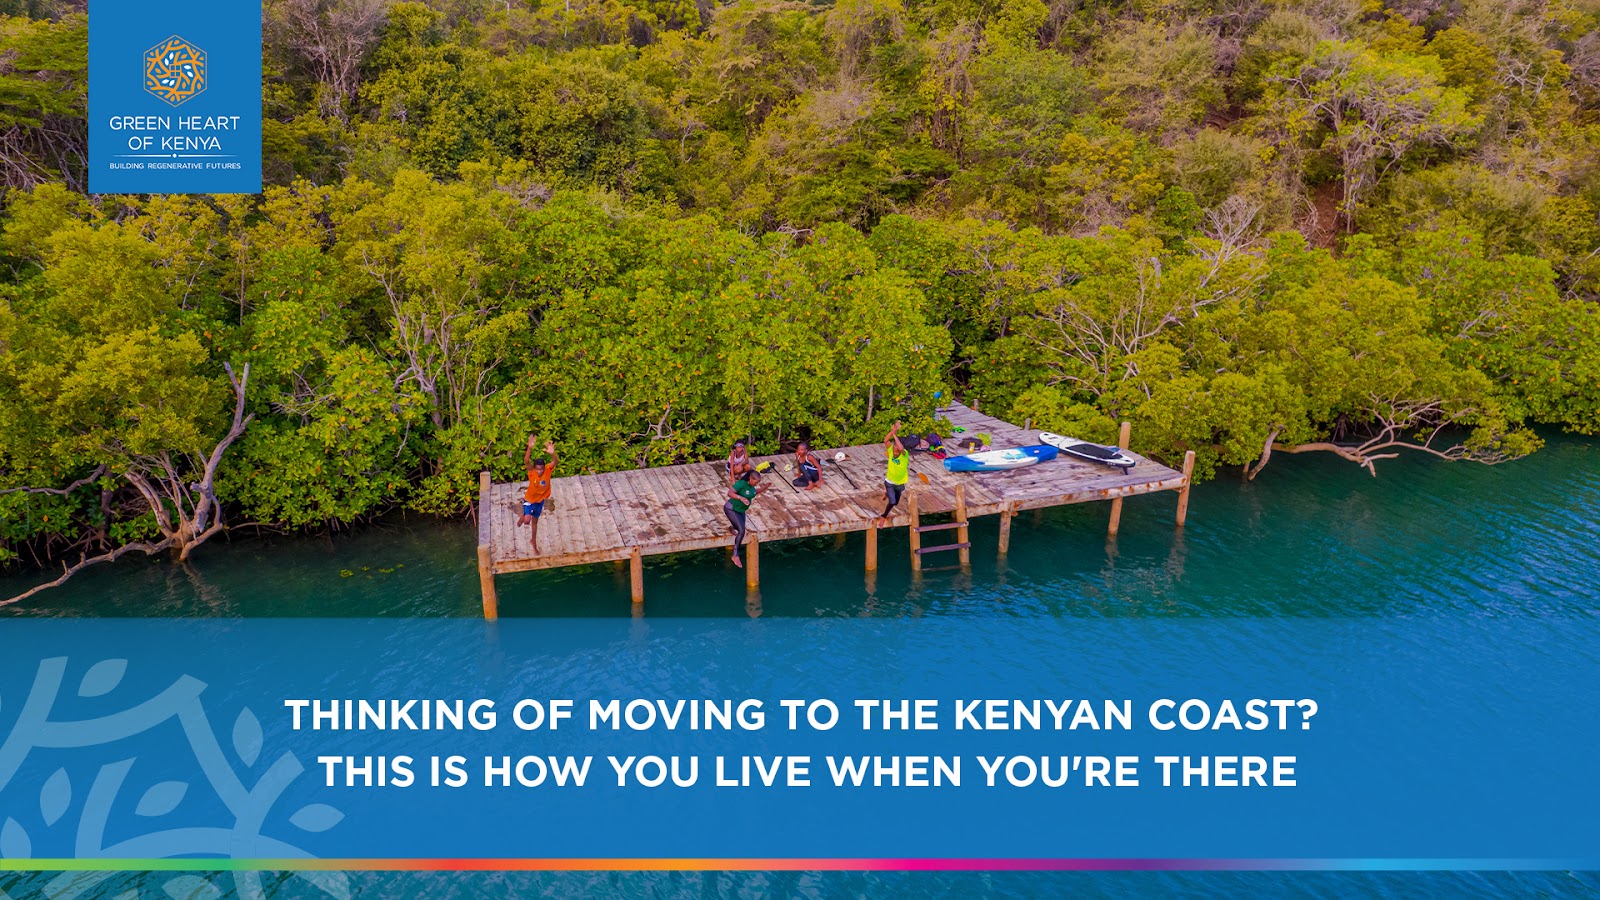 Making The Best Of Your Life At The Kenyan Coast